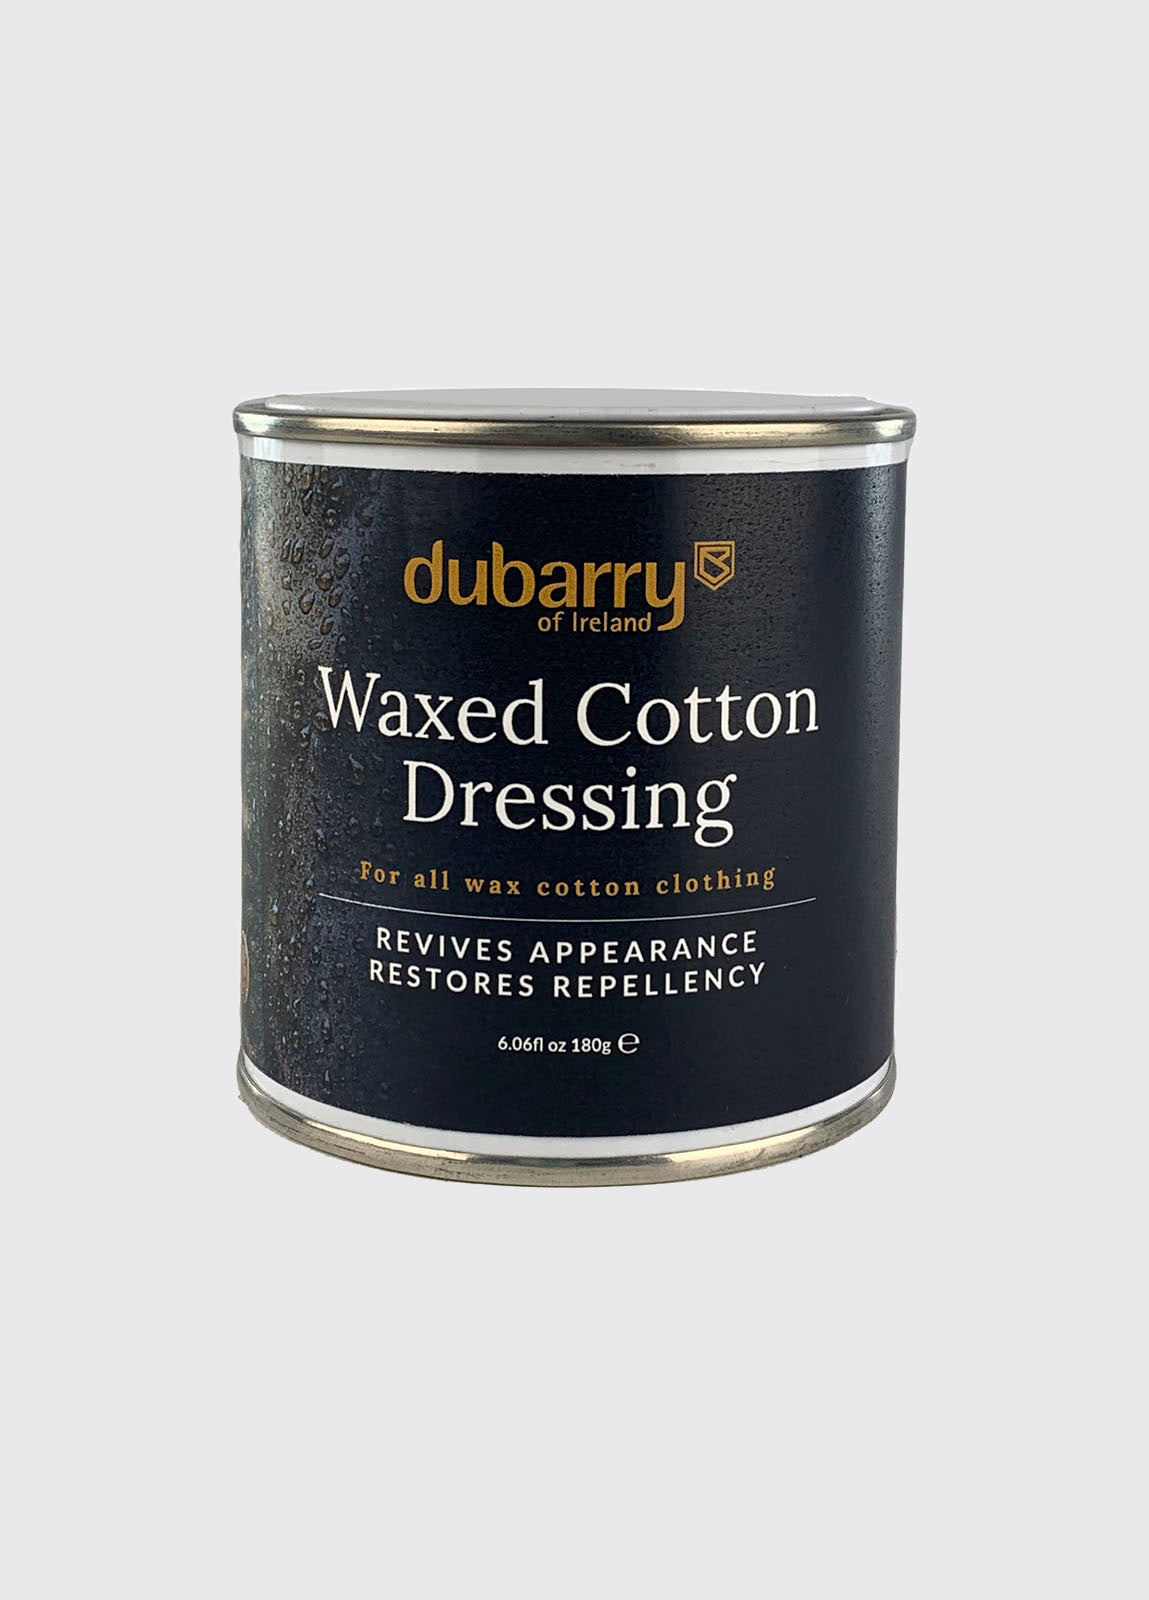 Dubarry Waxed Cotton Dressing